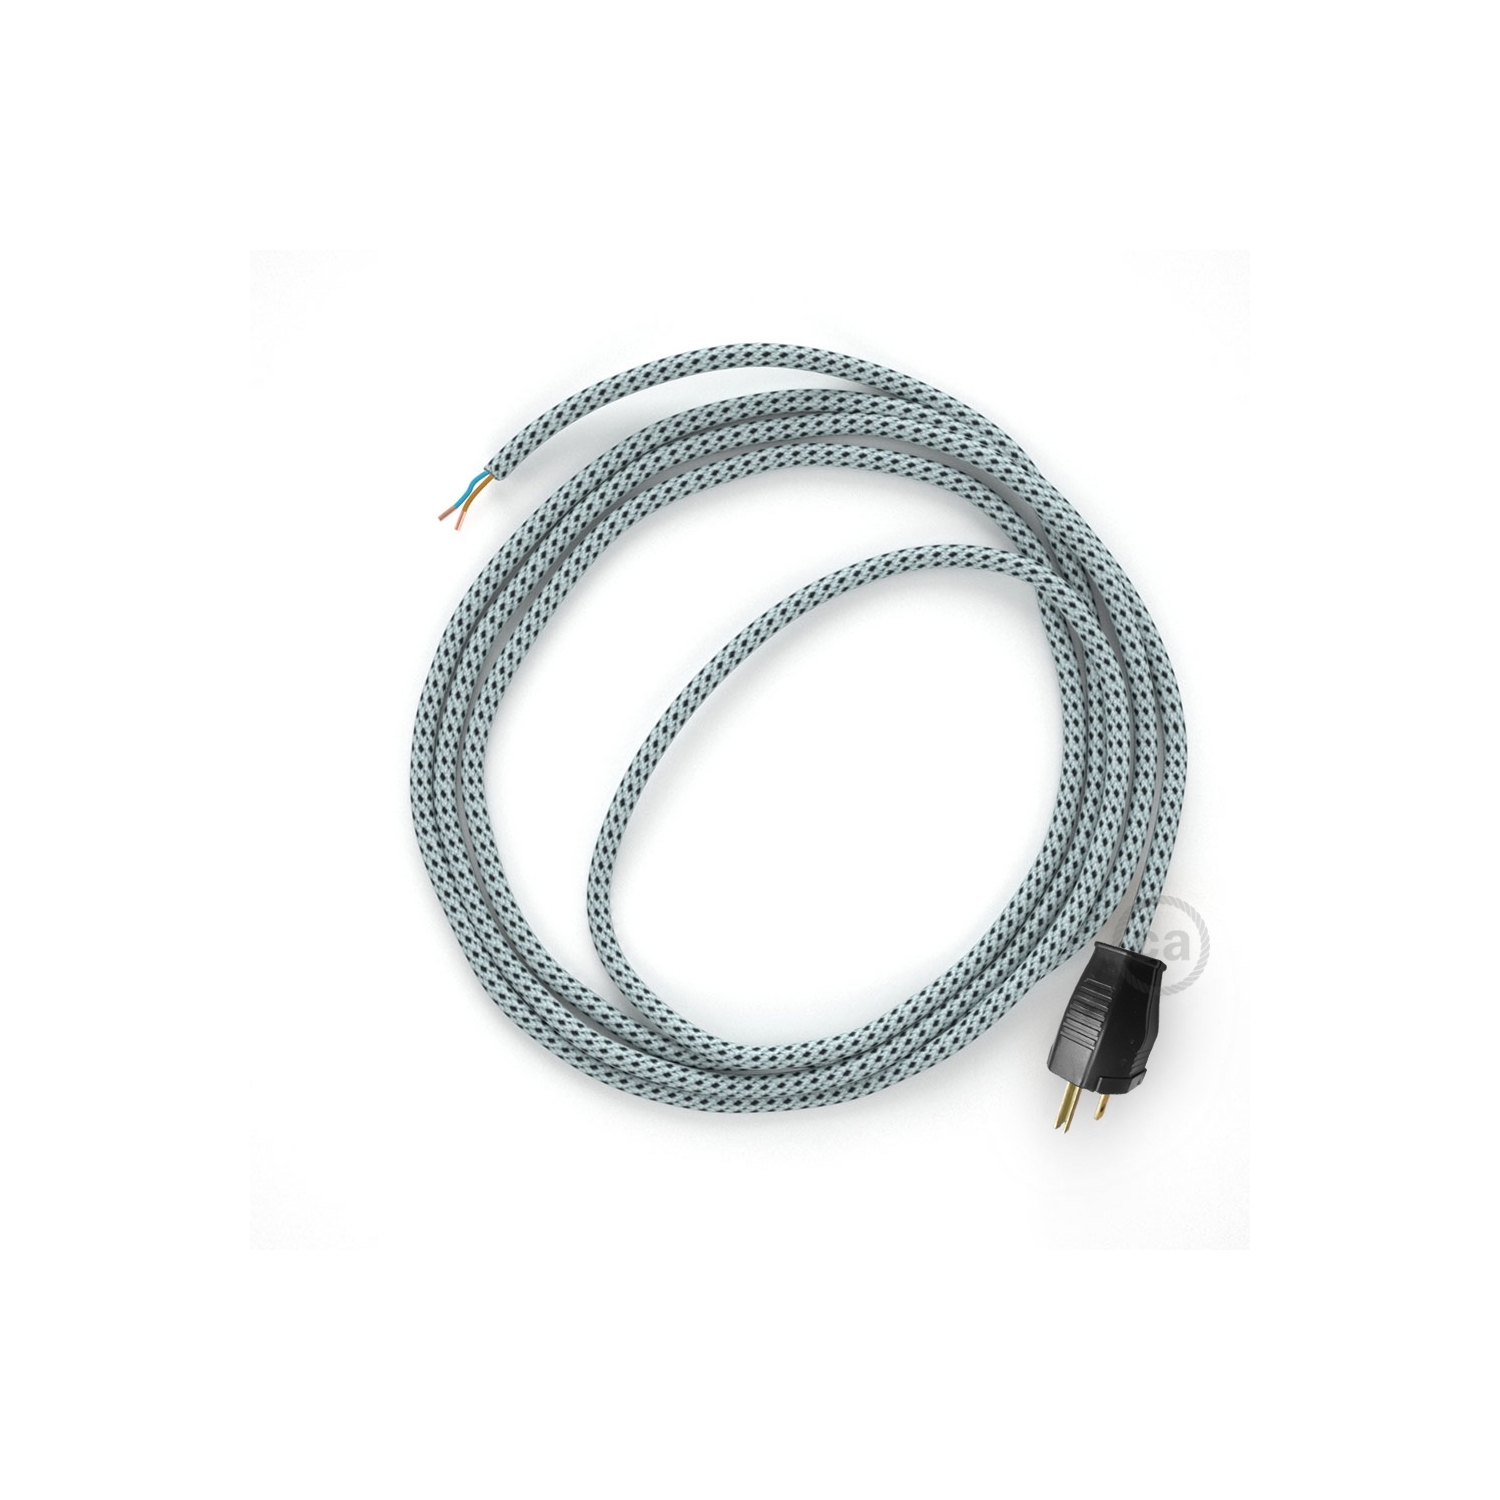 Cord-set - RT14 White & Black Tracer Covered Round Cable